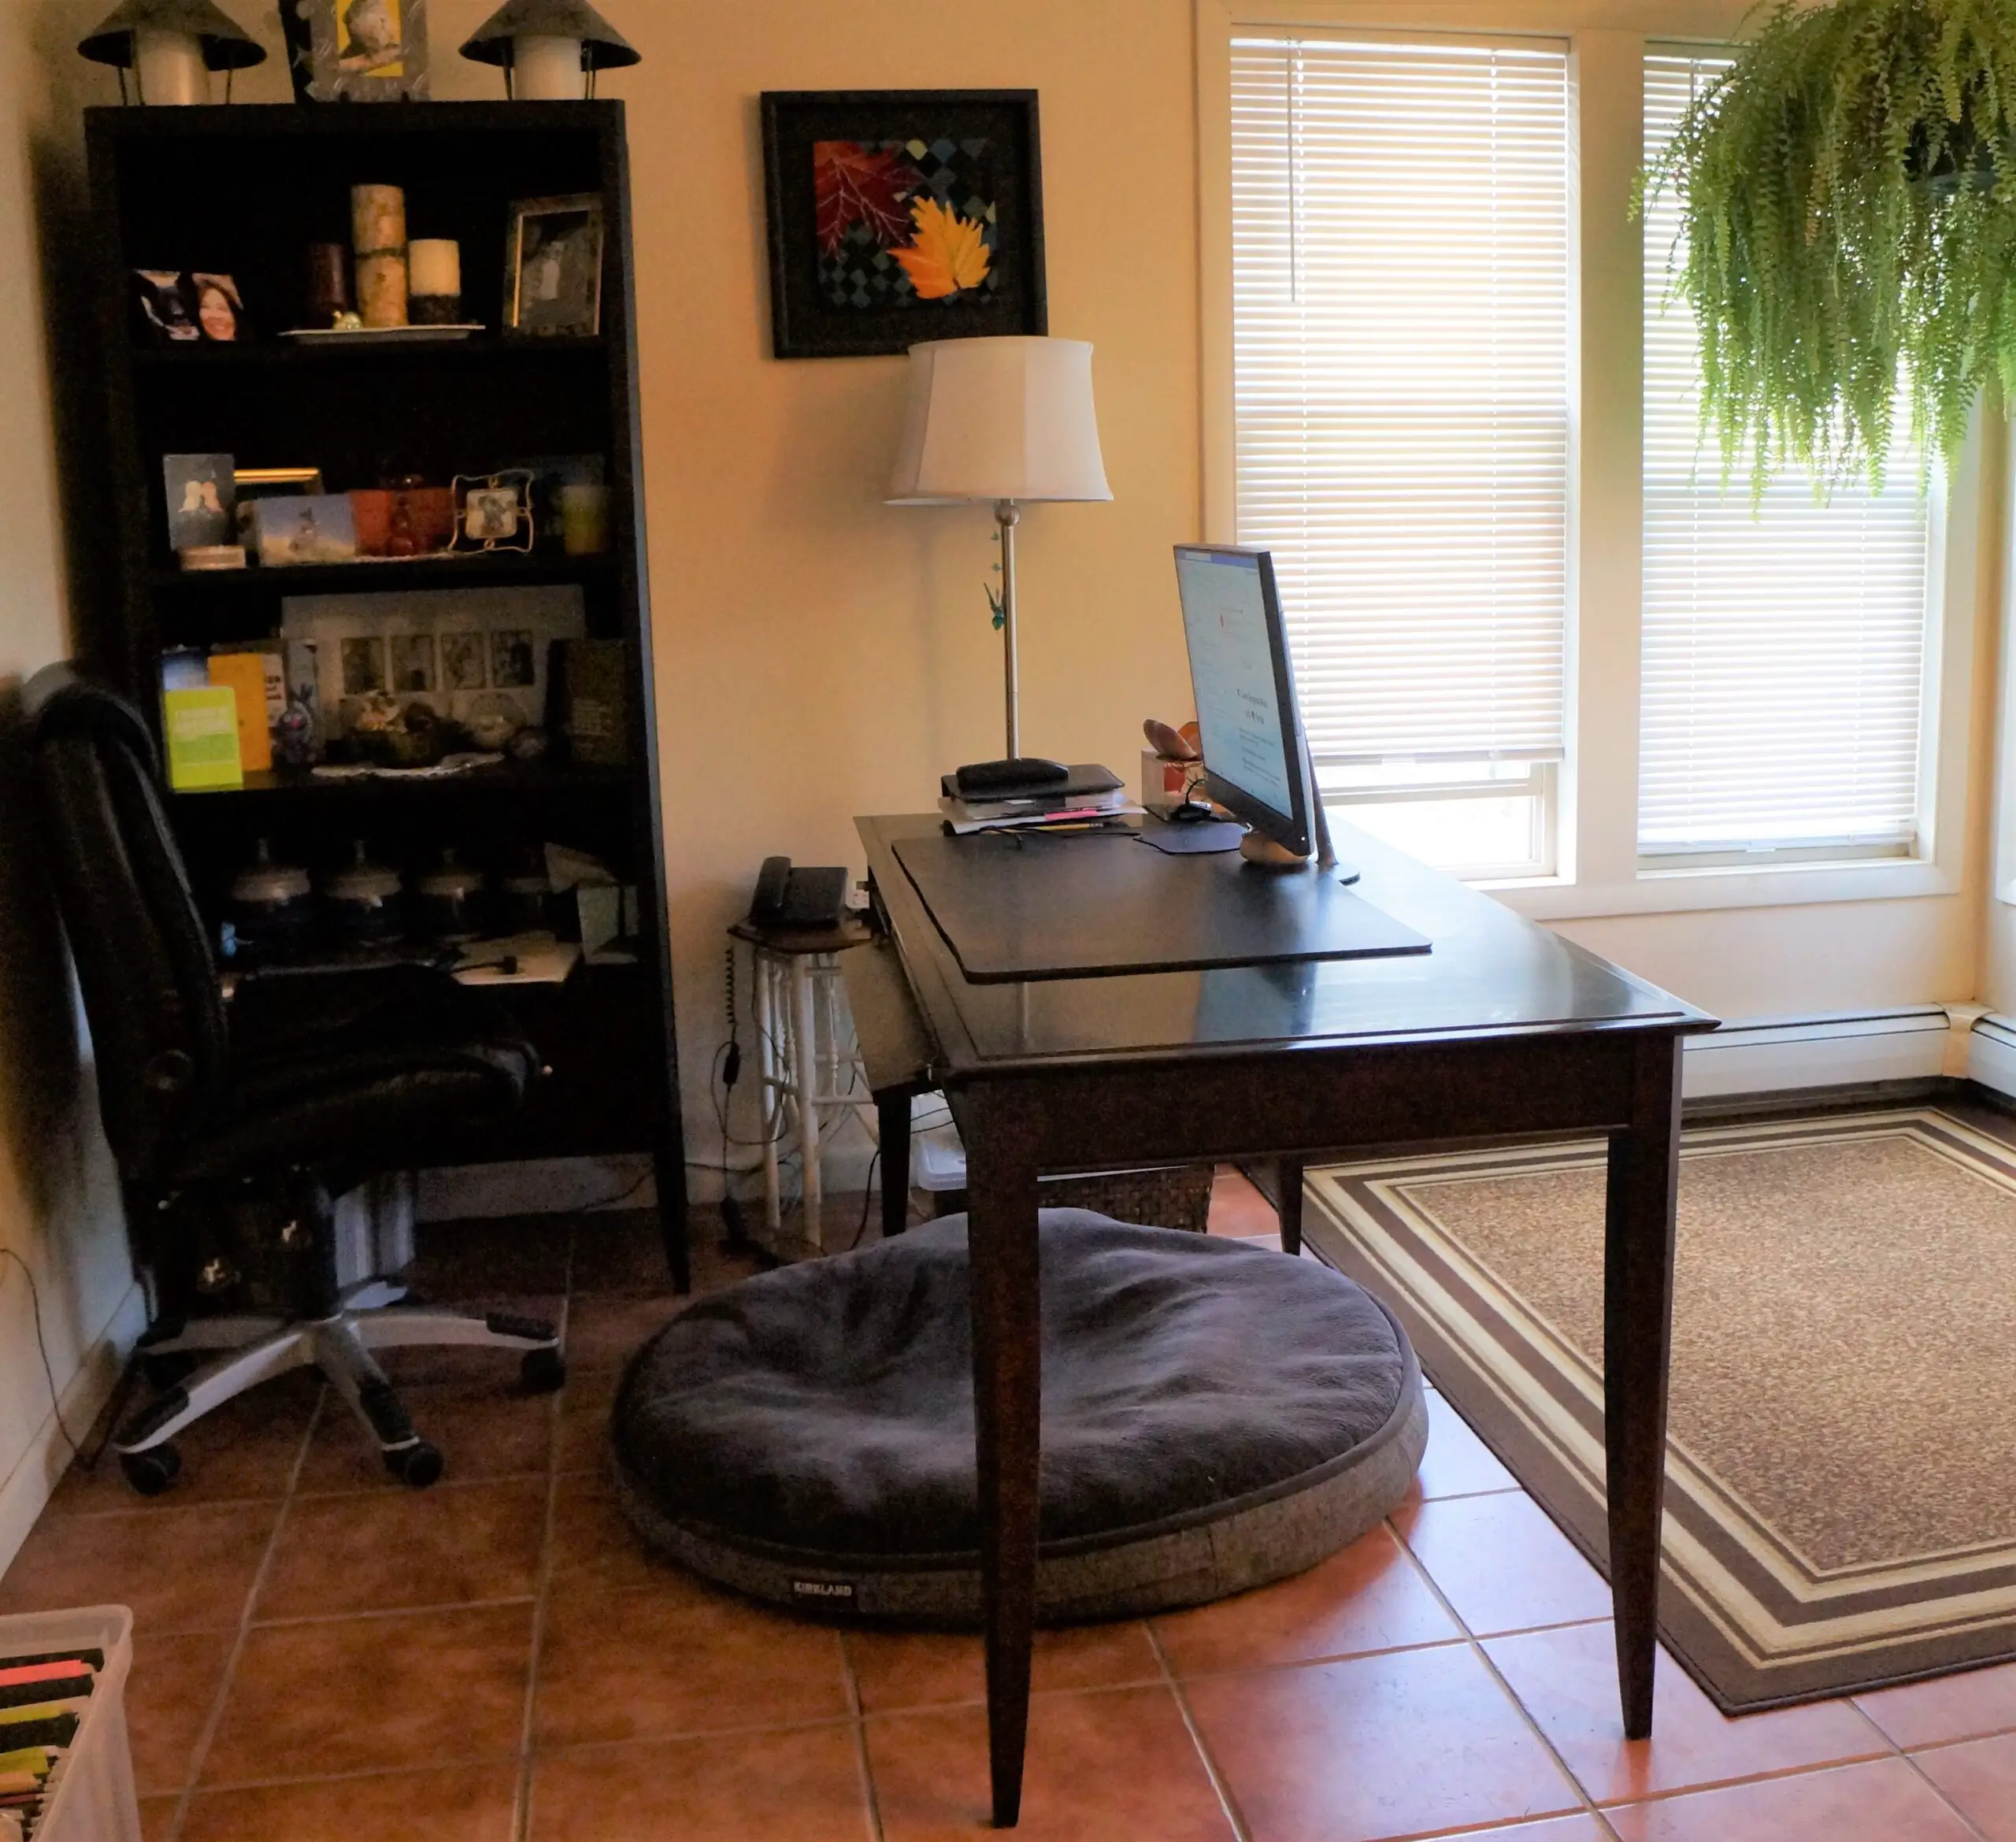 foster puppy set up - photo showing home office with desk, bookshelves, and area rug on the floor